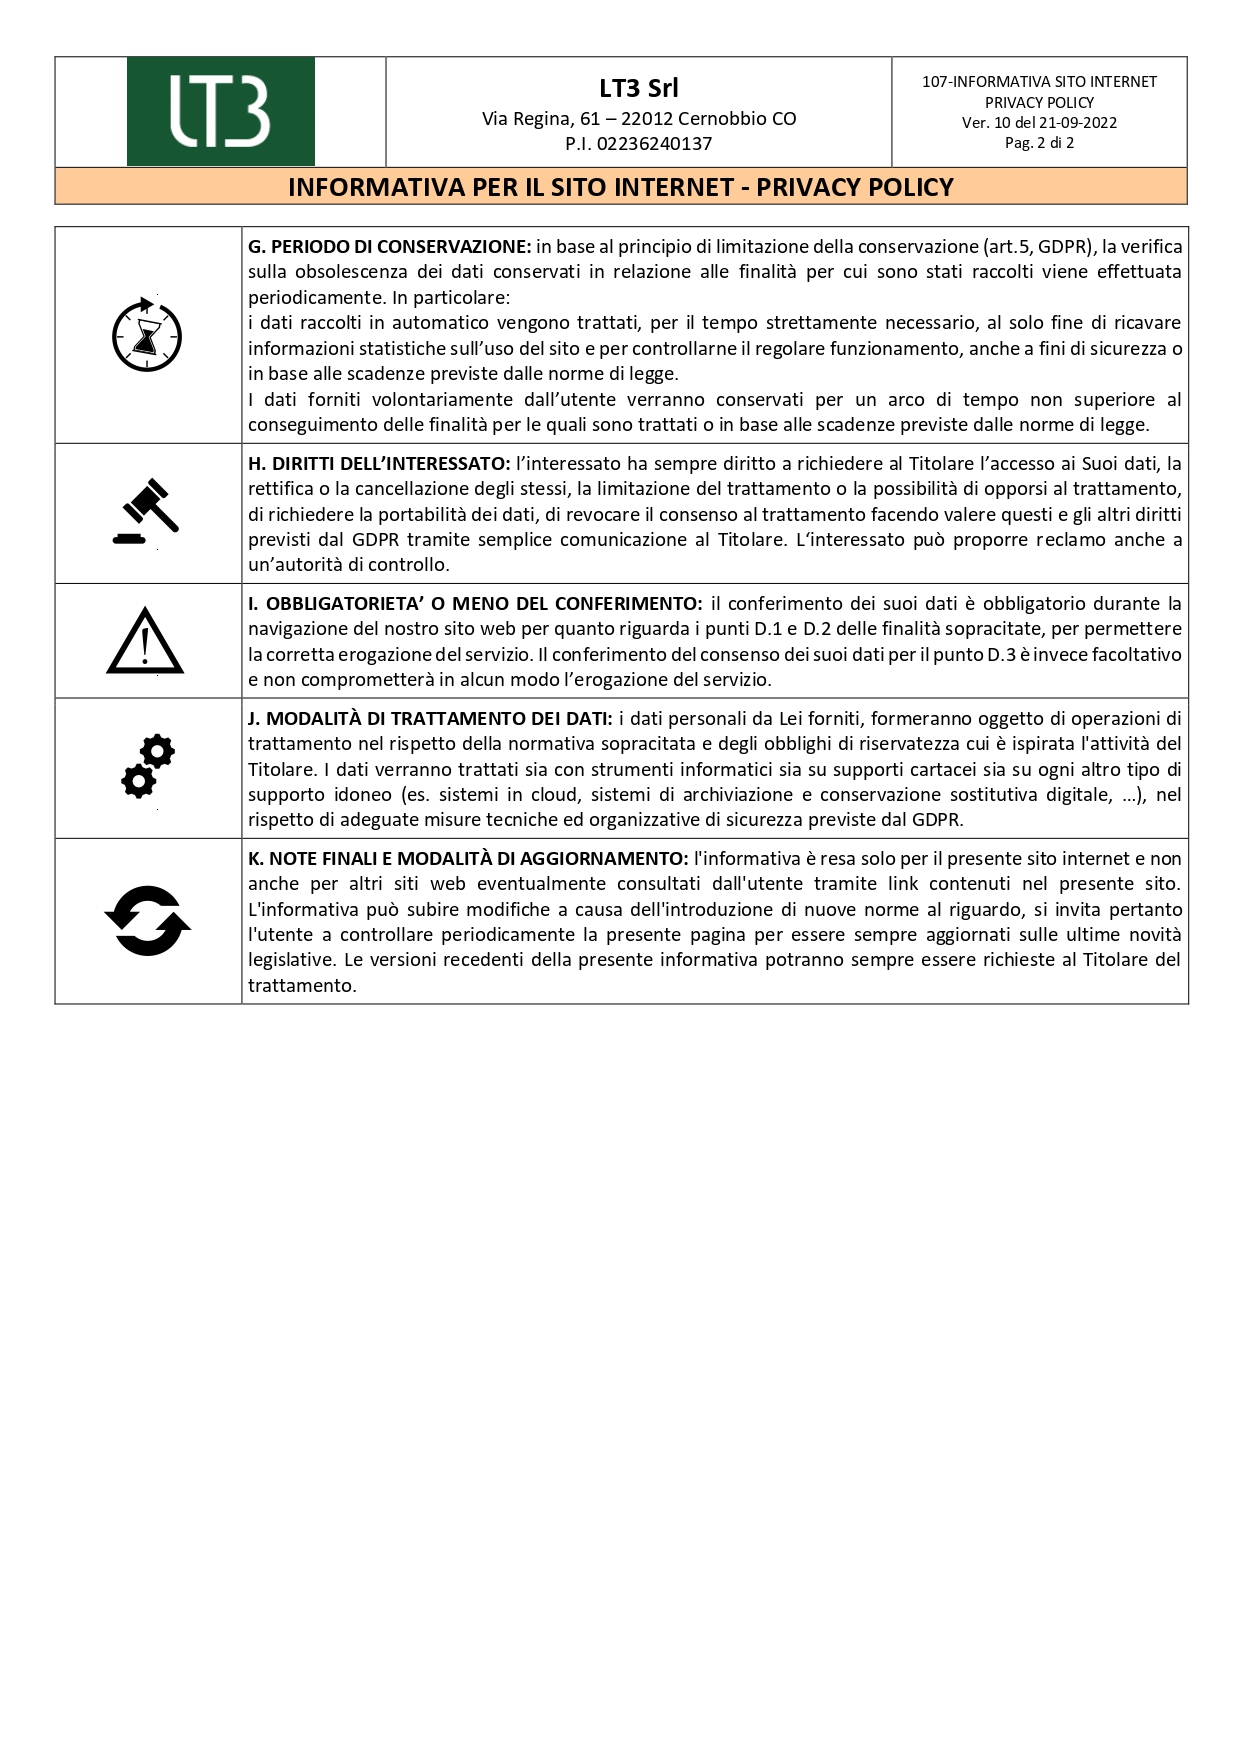 107-INFORMATIVA PER IL SITO INTERNET-PRIVACY POLICY-ver 10_pages-to-jpg-0002.jpg (717 KB)